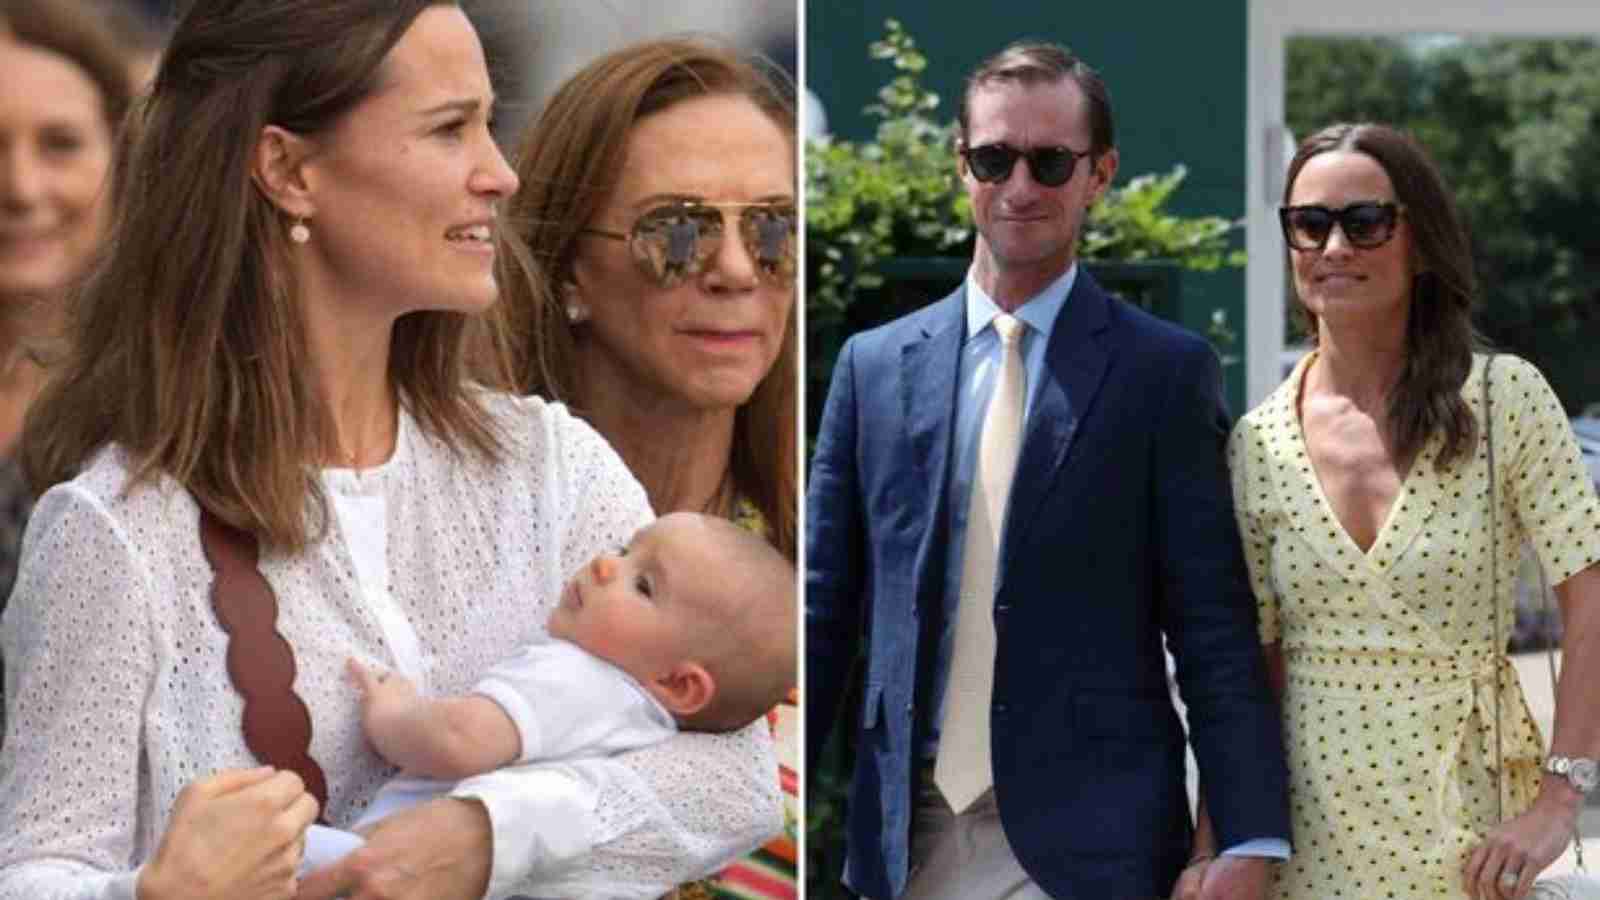 Pippa Middleton along with her family welcomes new member to the family